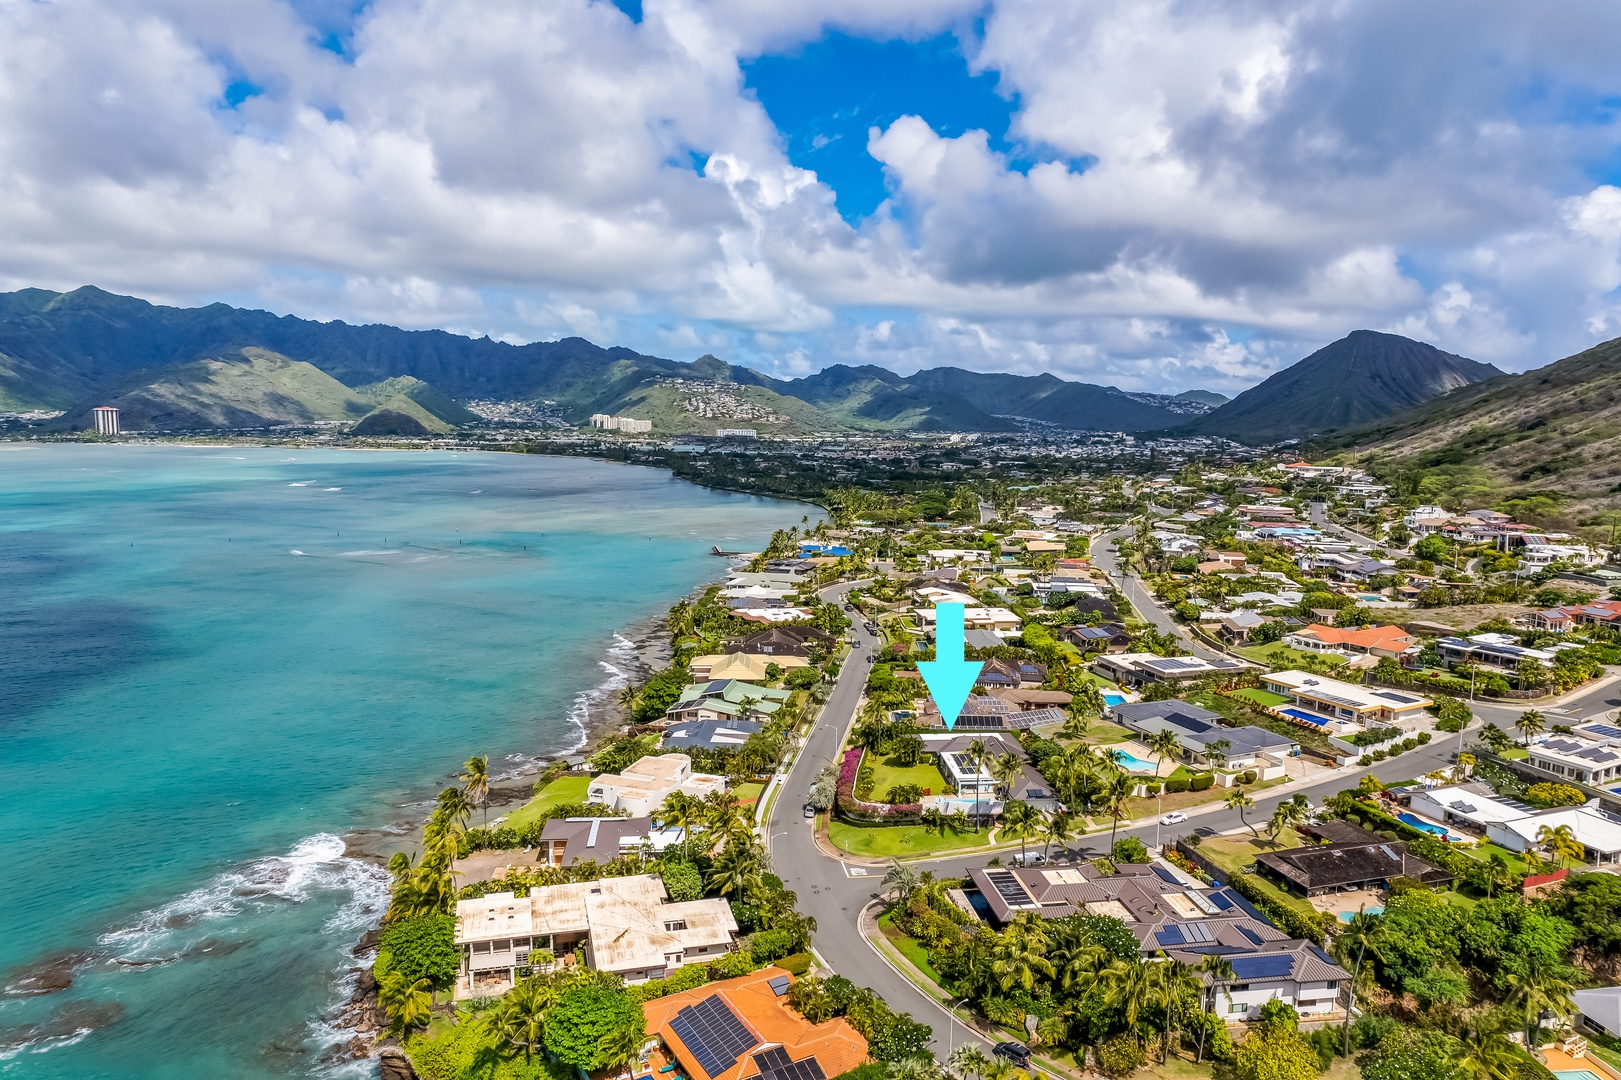 Honolulu Vacation Rentals, Hale Ola - This area of Oahu is known to have the island's best weather year-round, and the home is ideally located for travel east or west to all Oahu attractions